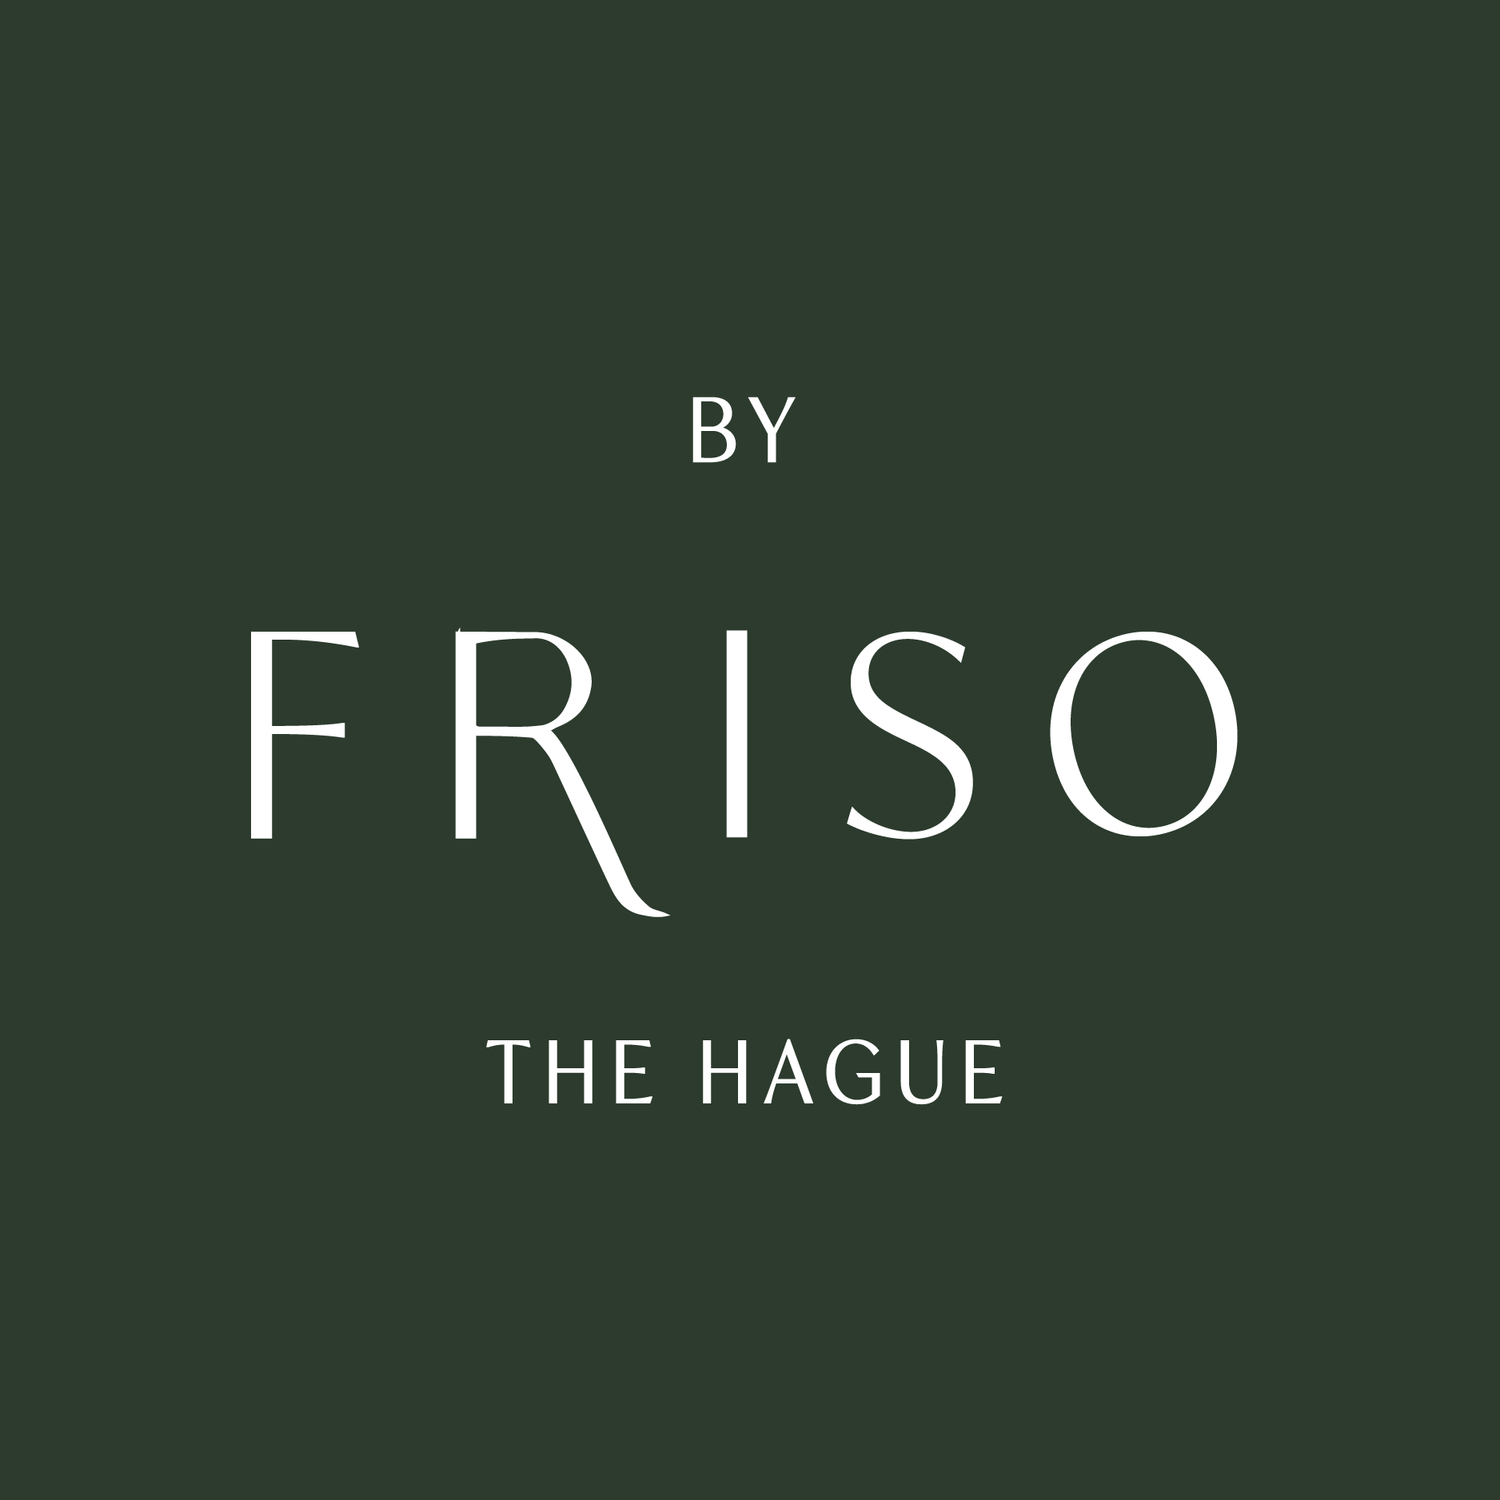 Boutique Hotel By Friso, The Hague